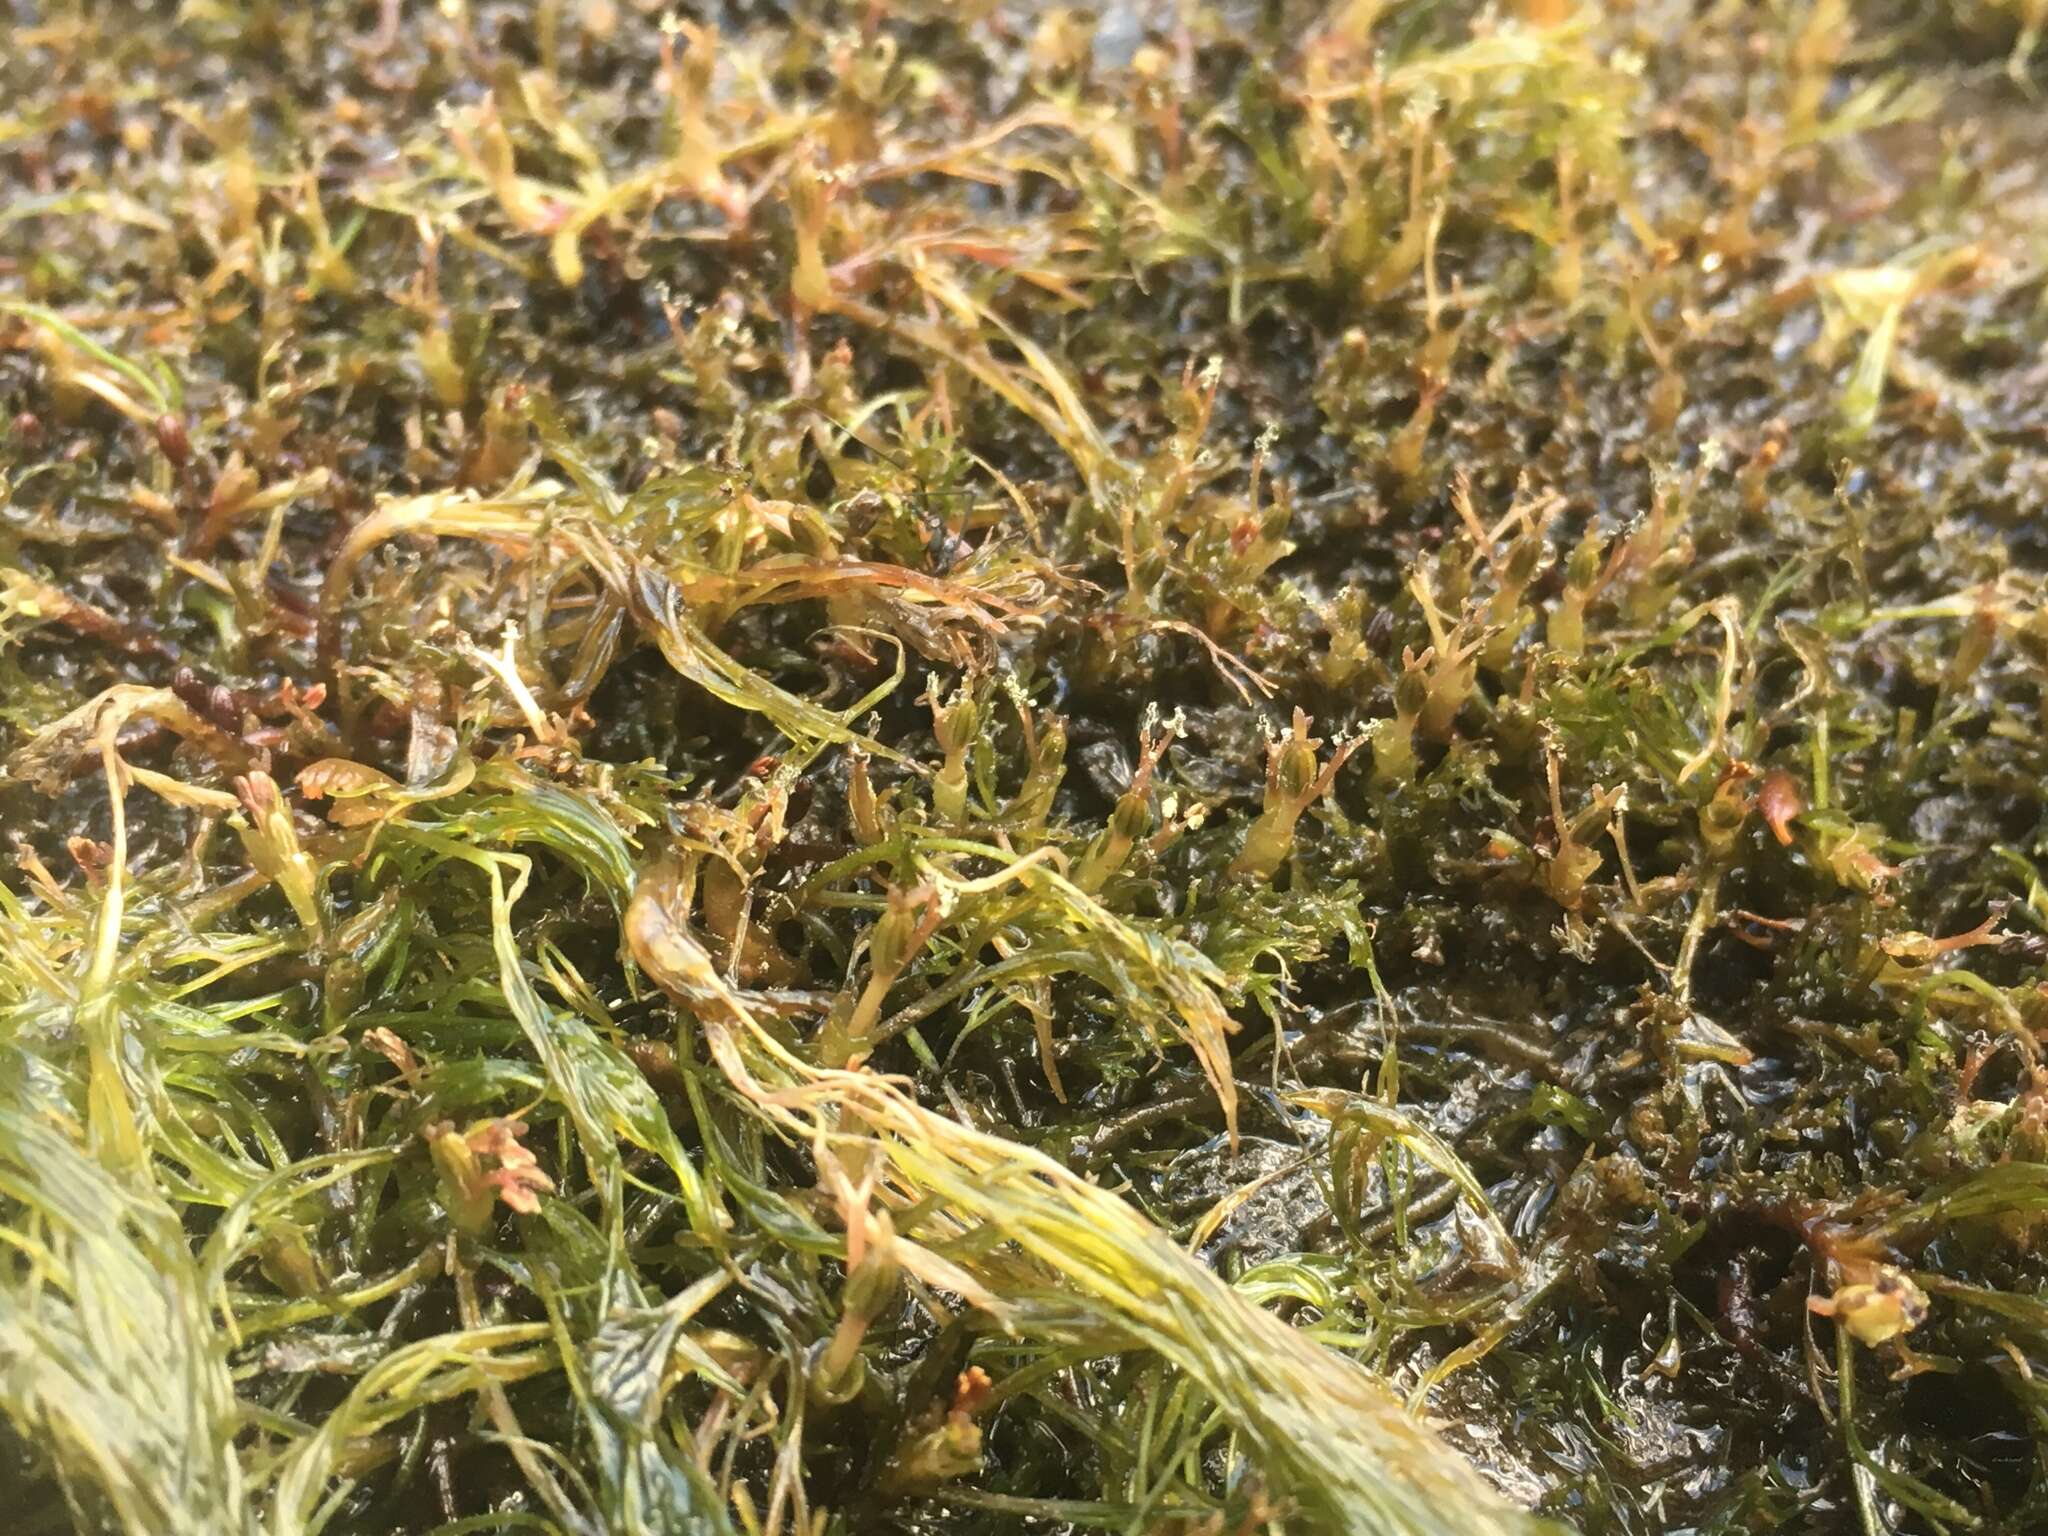 Image of riverweed